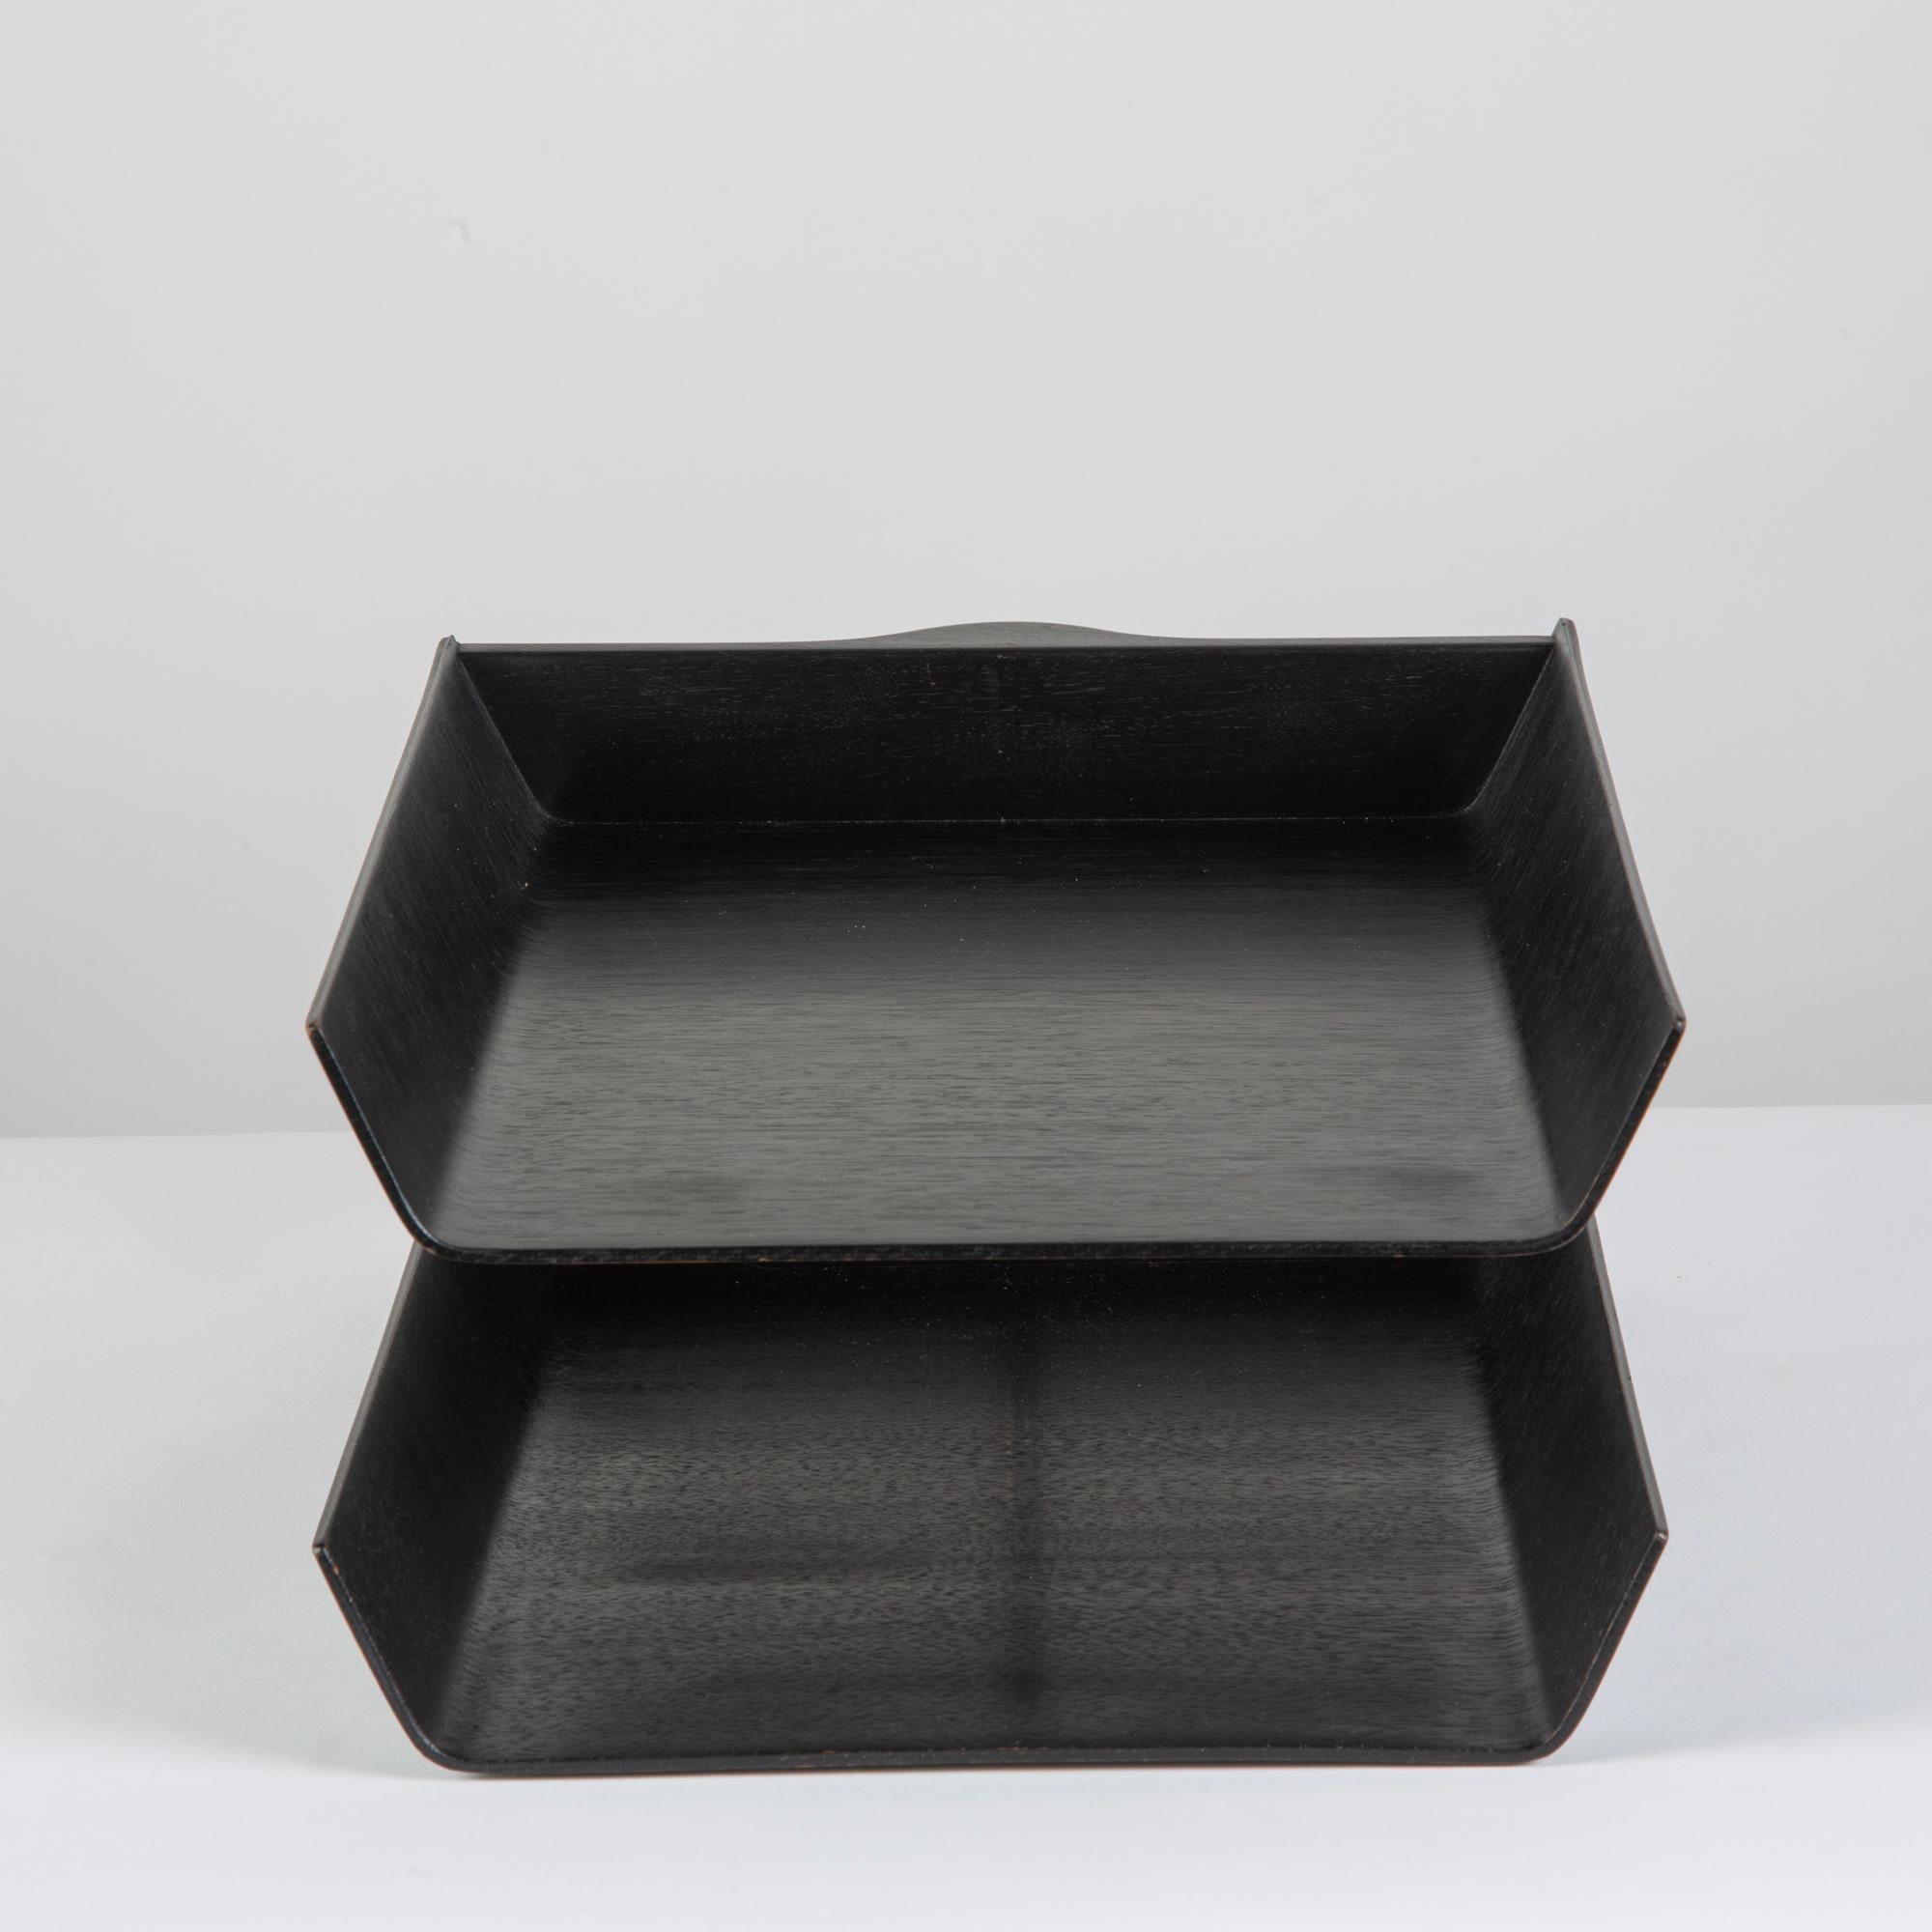 Paper tray designed by Florence Knoll in 1948. This two tier paper tray is composed of ebonized molded walnut plywood. The trays rotate around a rear central post of brushed aluminum.

Tray bottom retains the original manufacturer’s